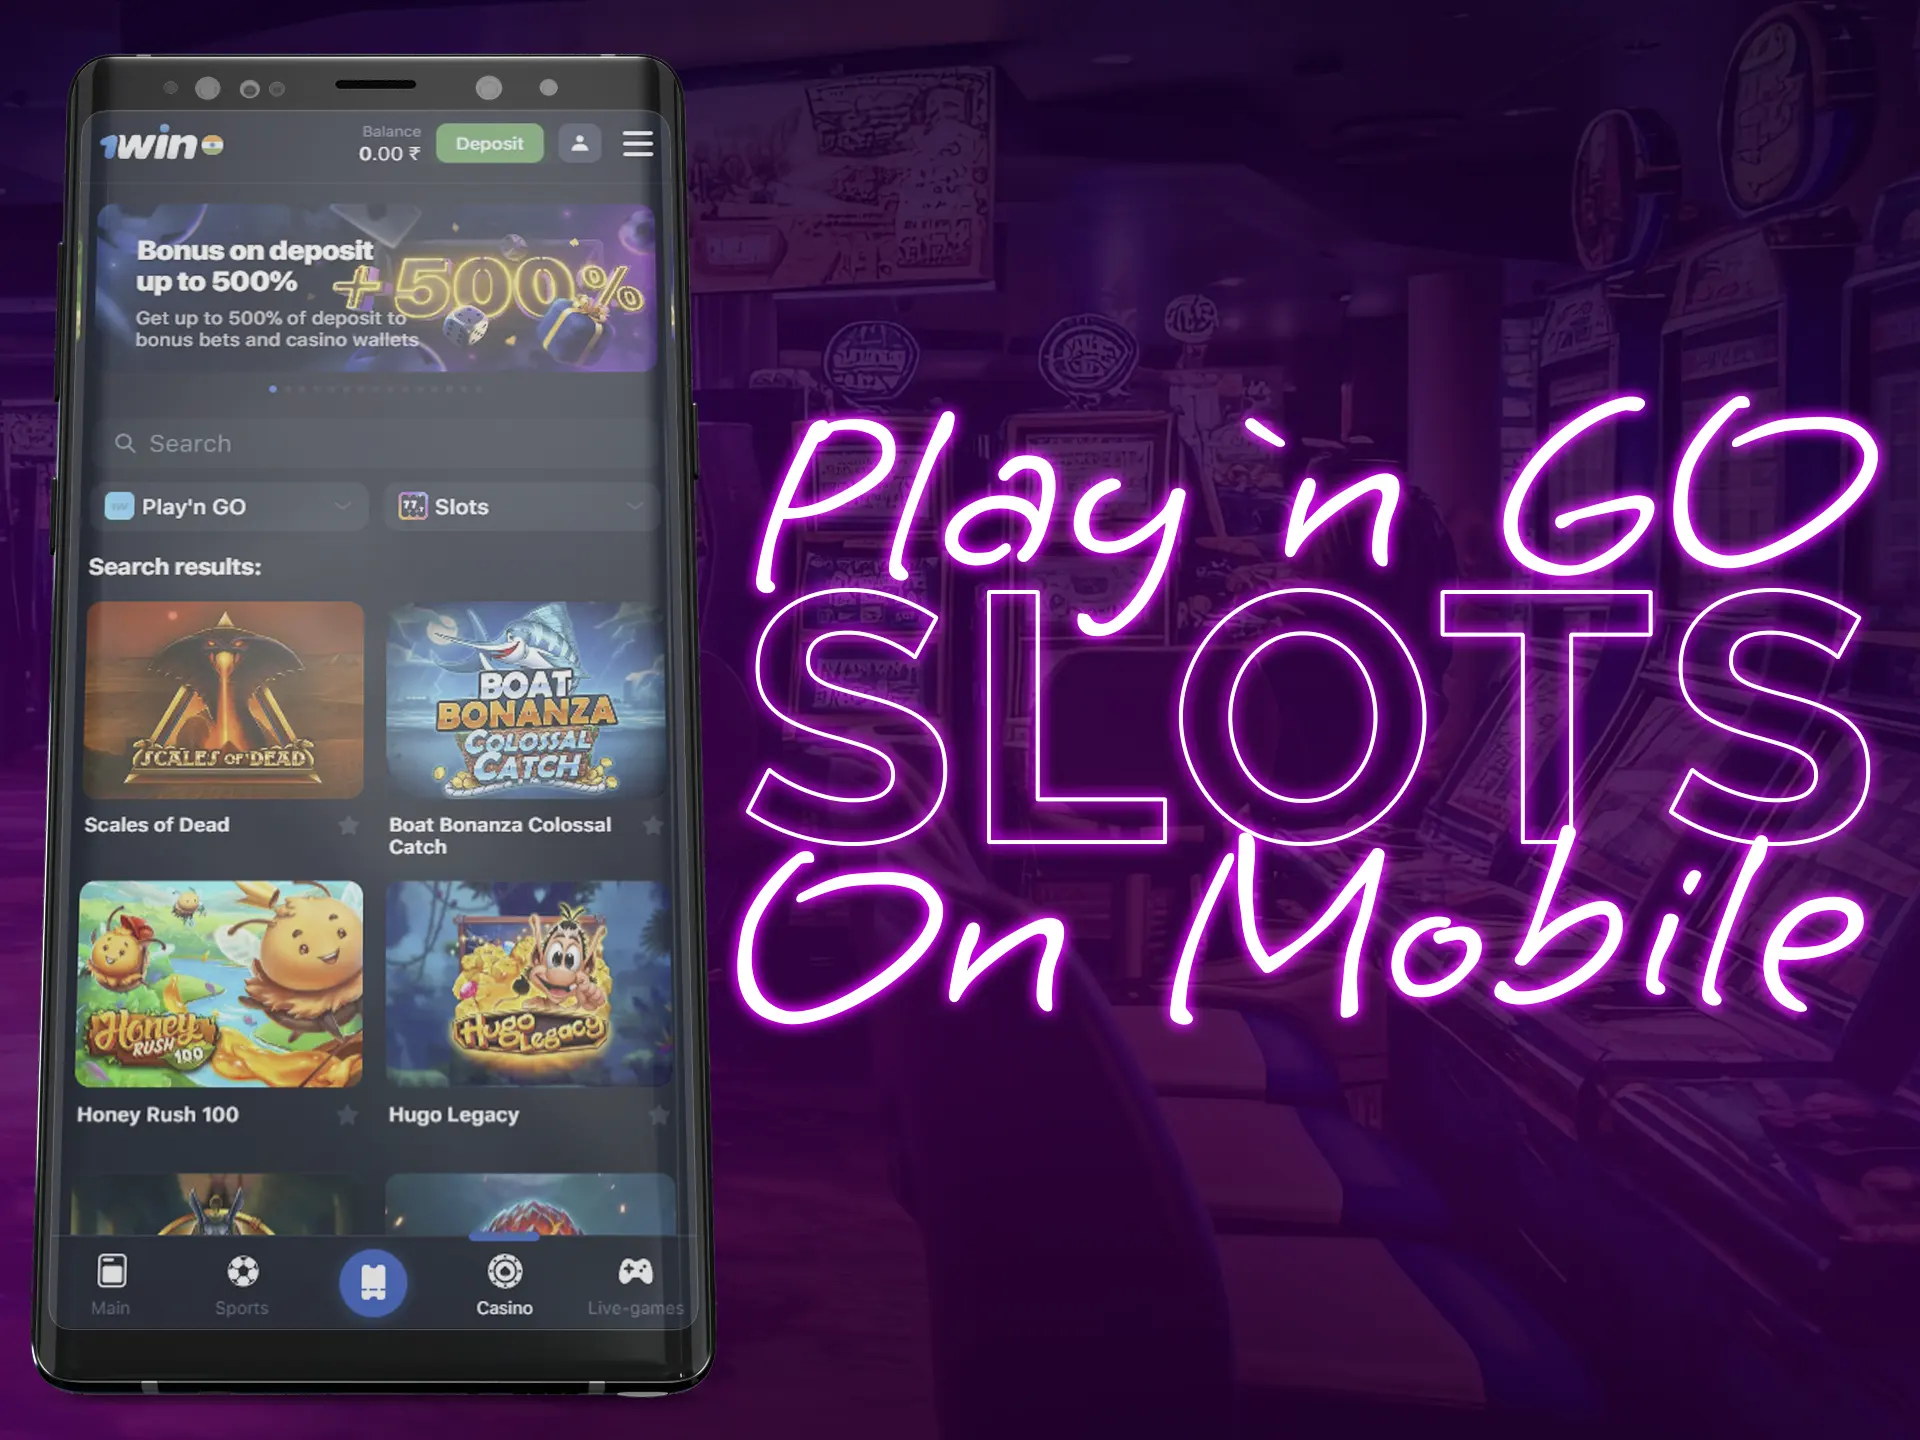 Players can easily access Play'n Go games on their smartphones or tablets.